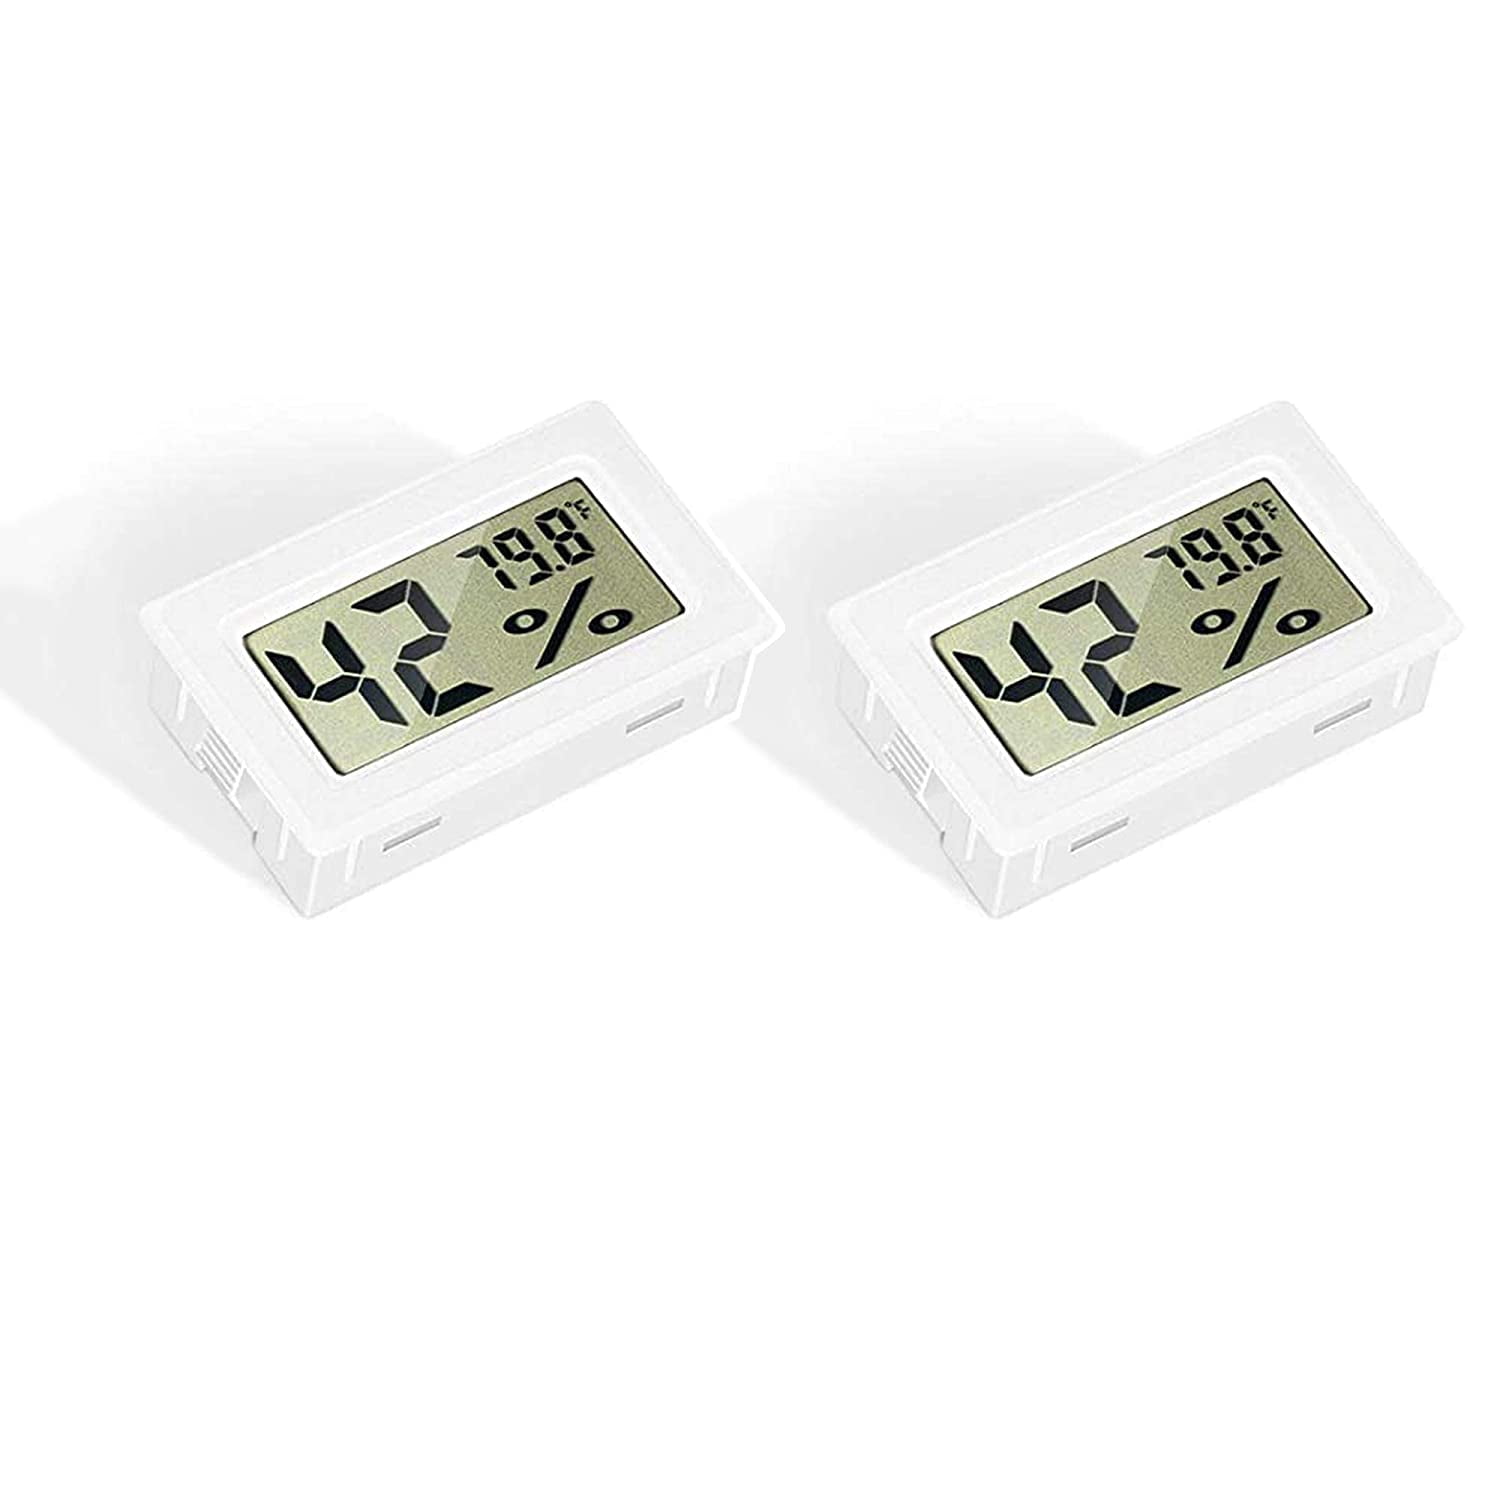 Temperature Humidity Gauge with LCD for Home Garden Office Fridge Cellar Digital Thermometer Hygrometer Greenhouse